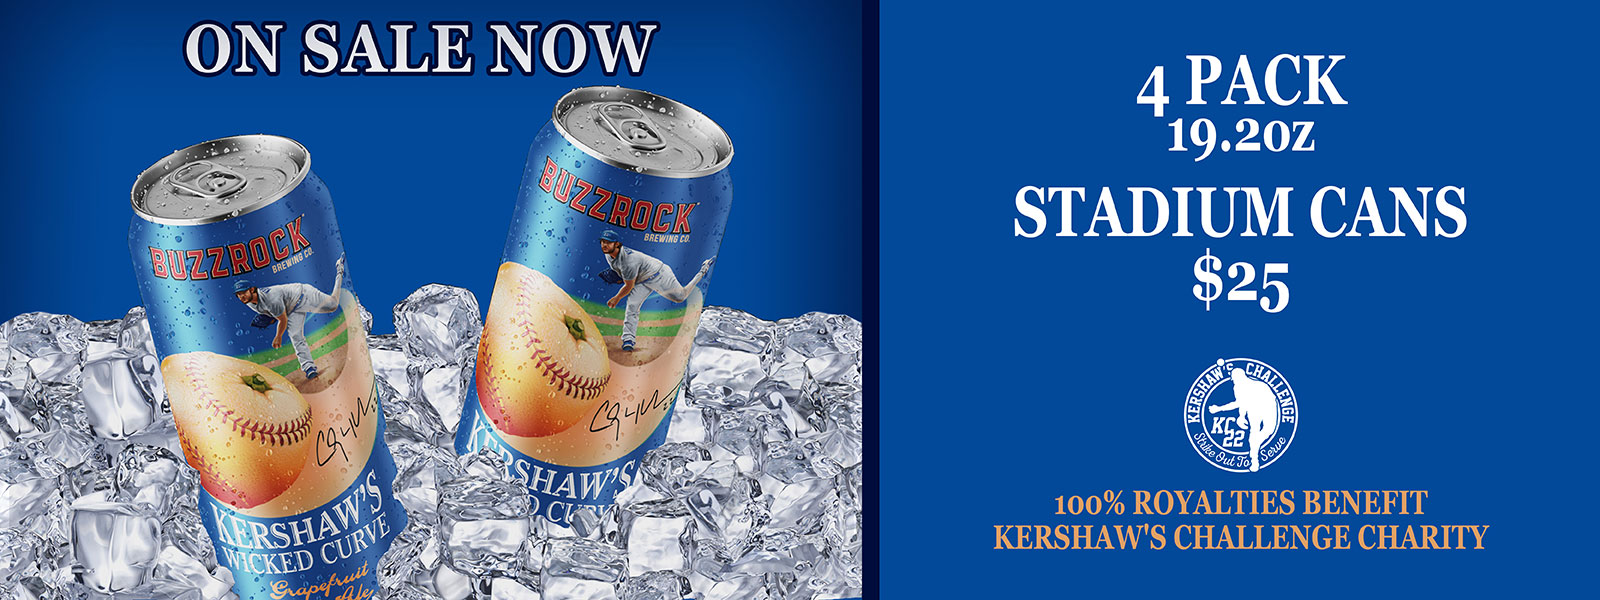 Kershaw's Wicked Curve 4-pack of 19.2 oz stadium cans - on sale now $25